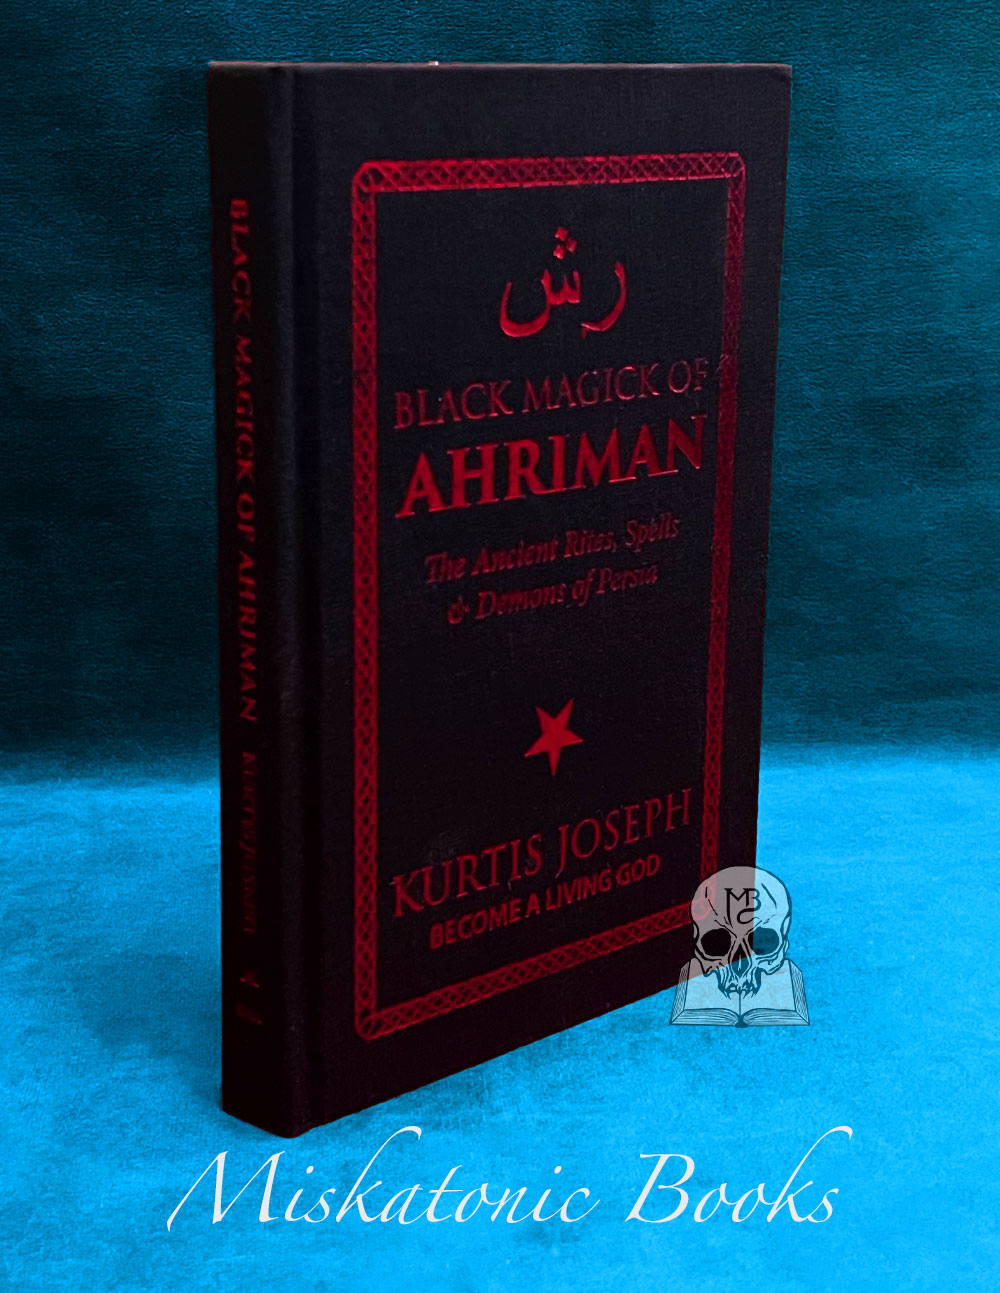 BLACK MAGICK OF AHRIMAN: The Ancient Rites, Spells & Demons of Persia by Kurtis Joseph (Hardcover Edition)